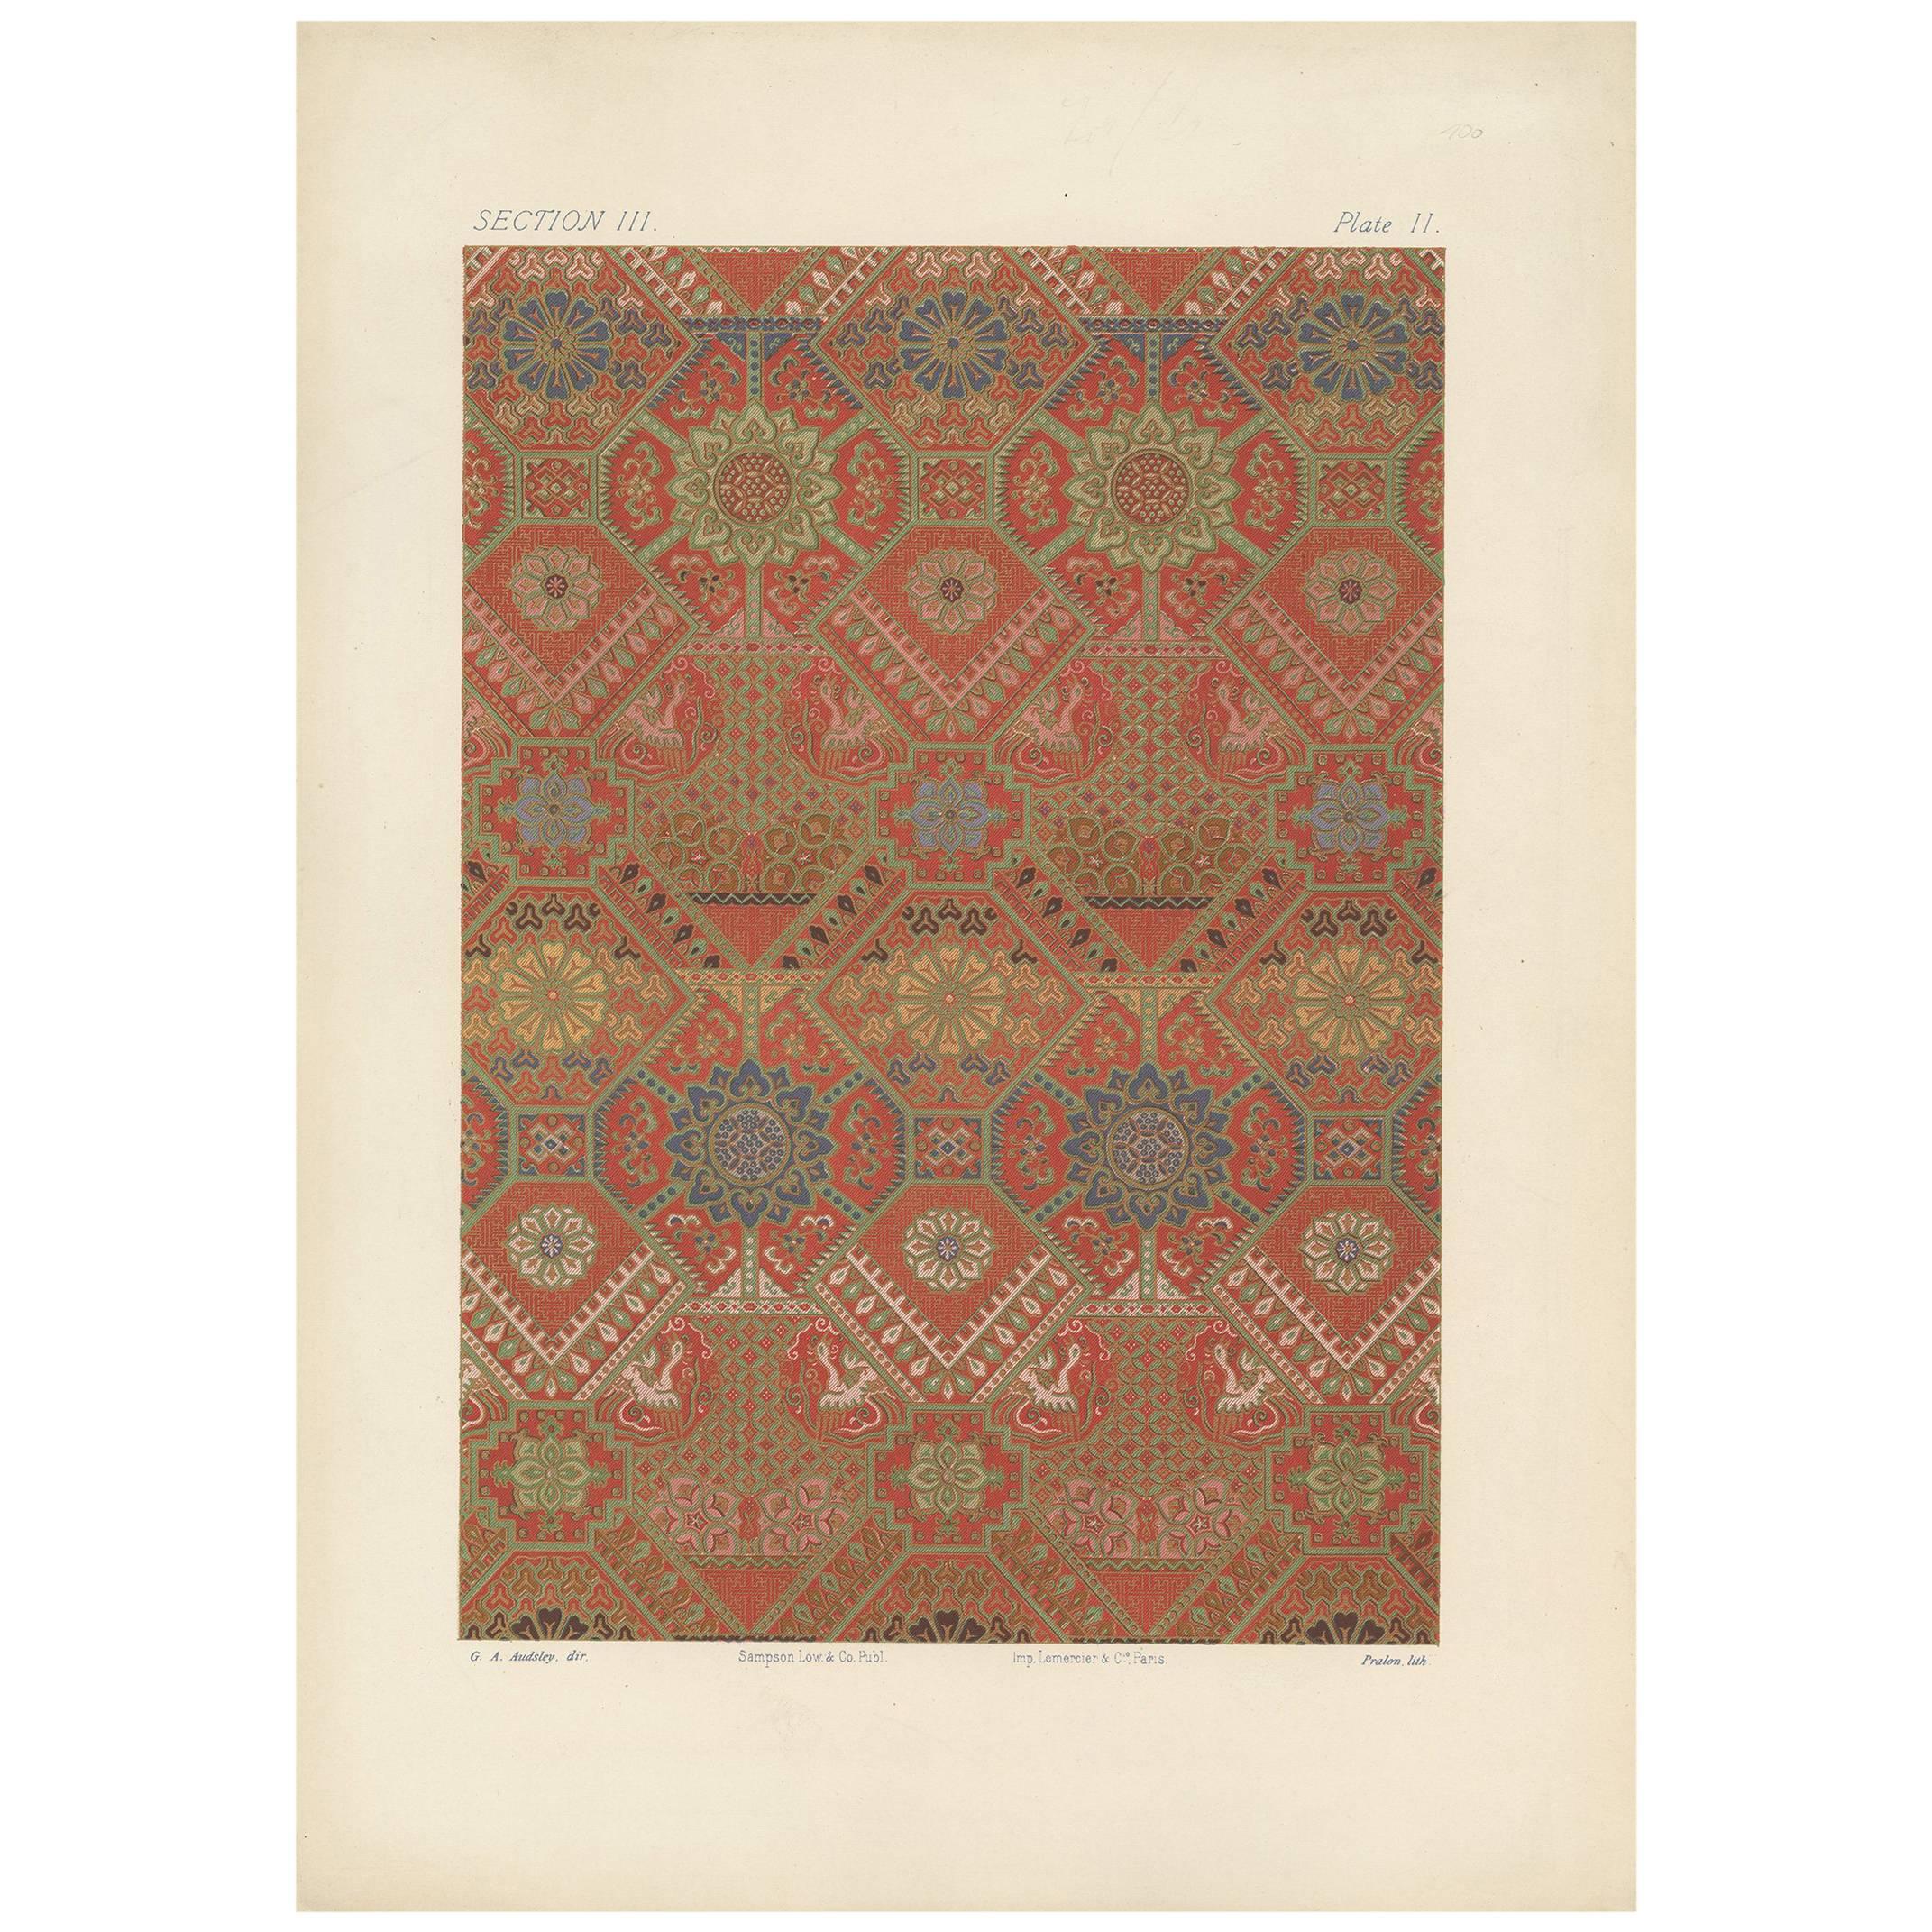 Antique Print of Silk and Gold Fabrics II 'Japan' by G. Audsley, 1882 For Sale